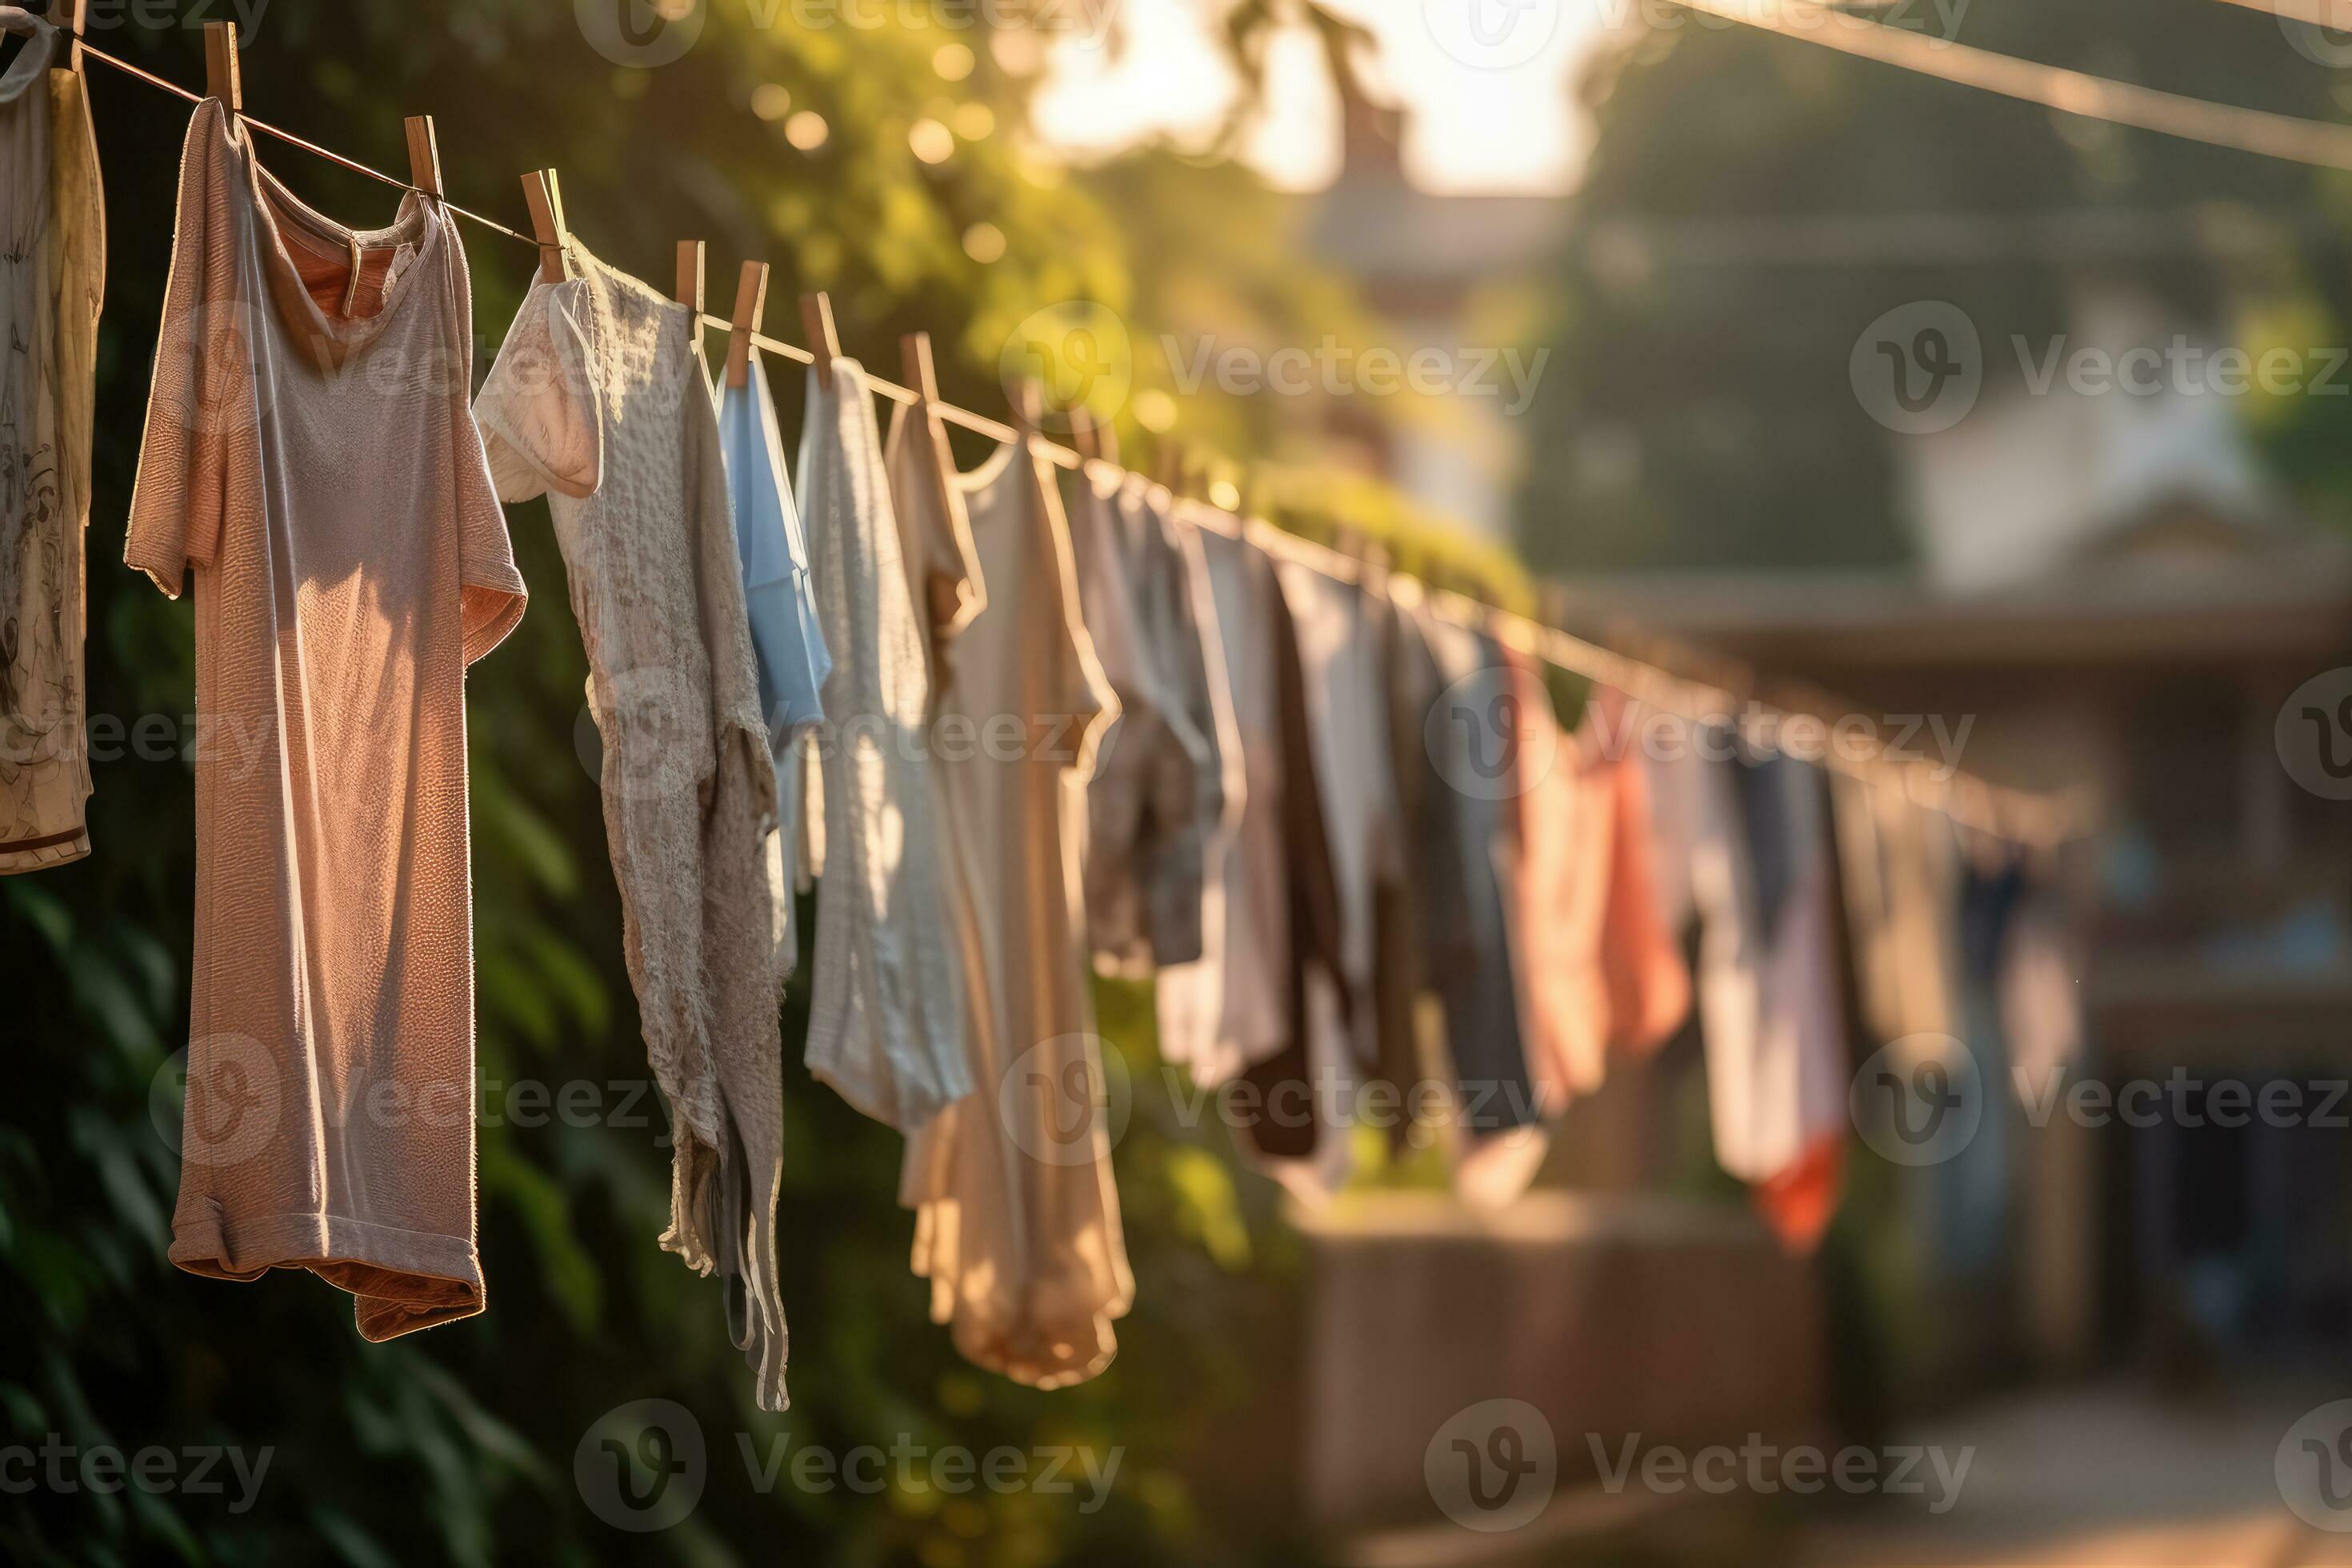 https://static.vecteezy.com/system/resources/previews/034/529/526/large_2x/things-are-hanging-on-a-rope-clothes-dry-in-the-air-generative-ai-technology-photo.jpg